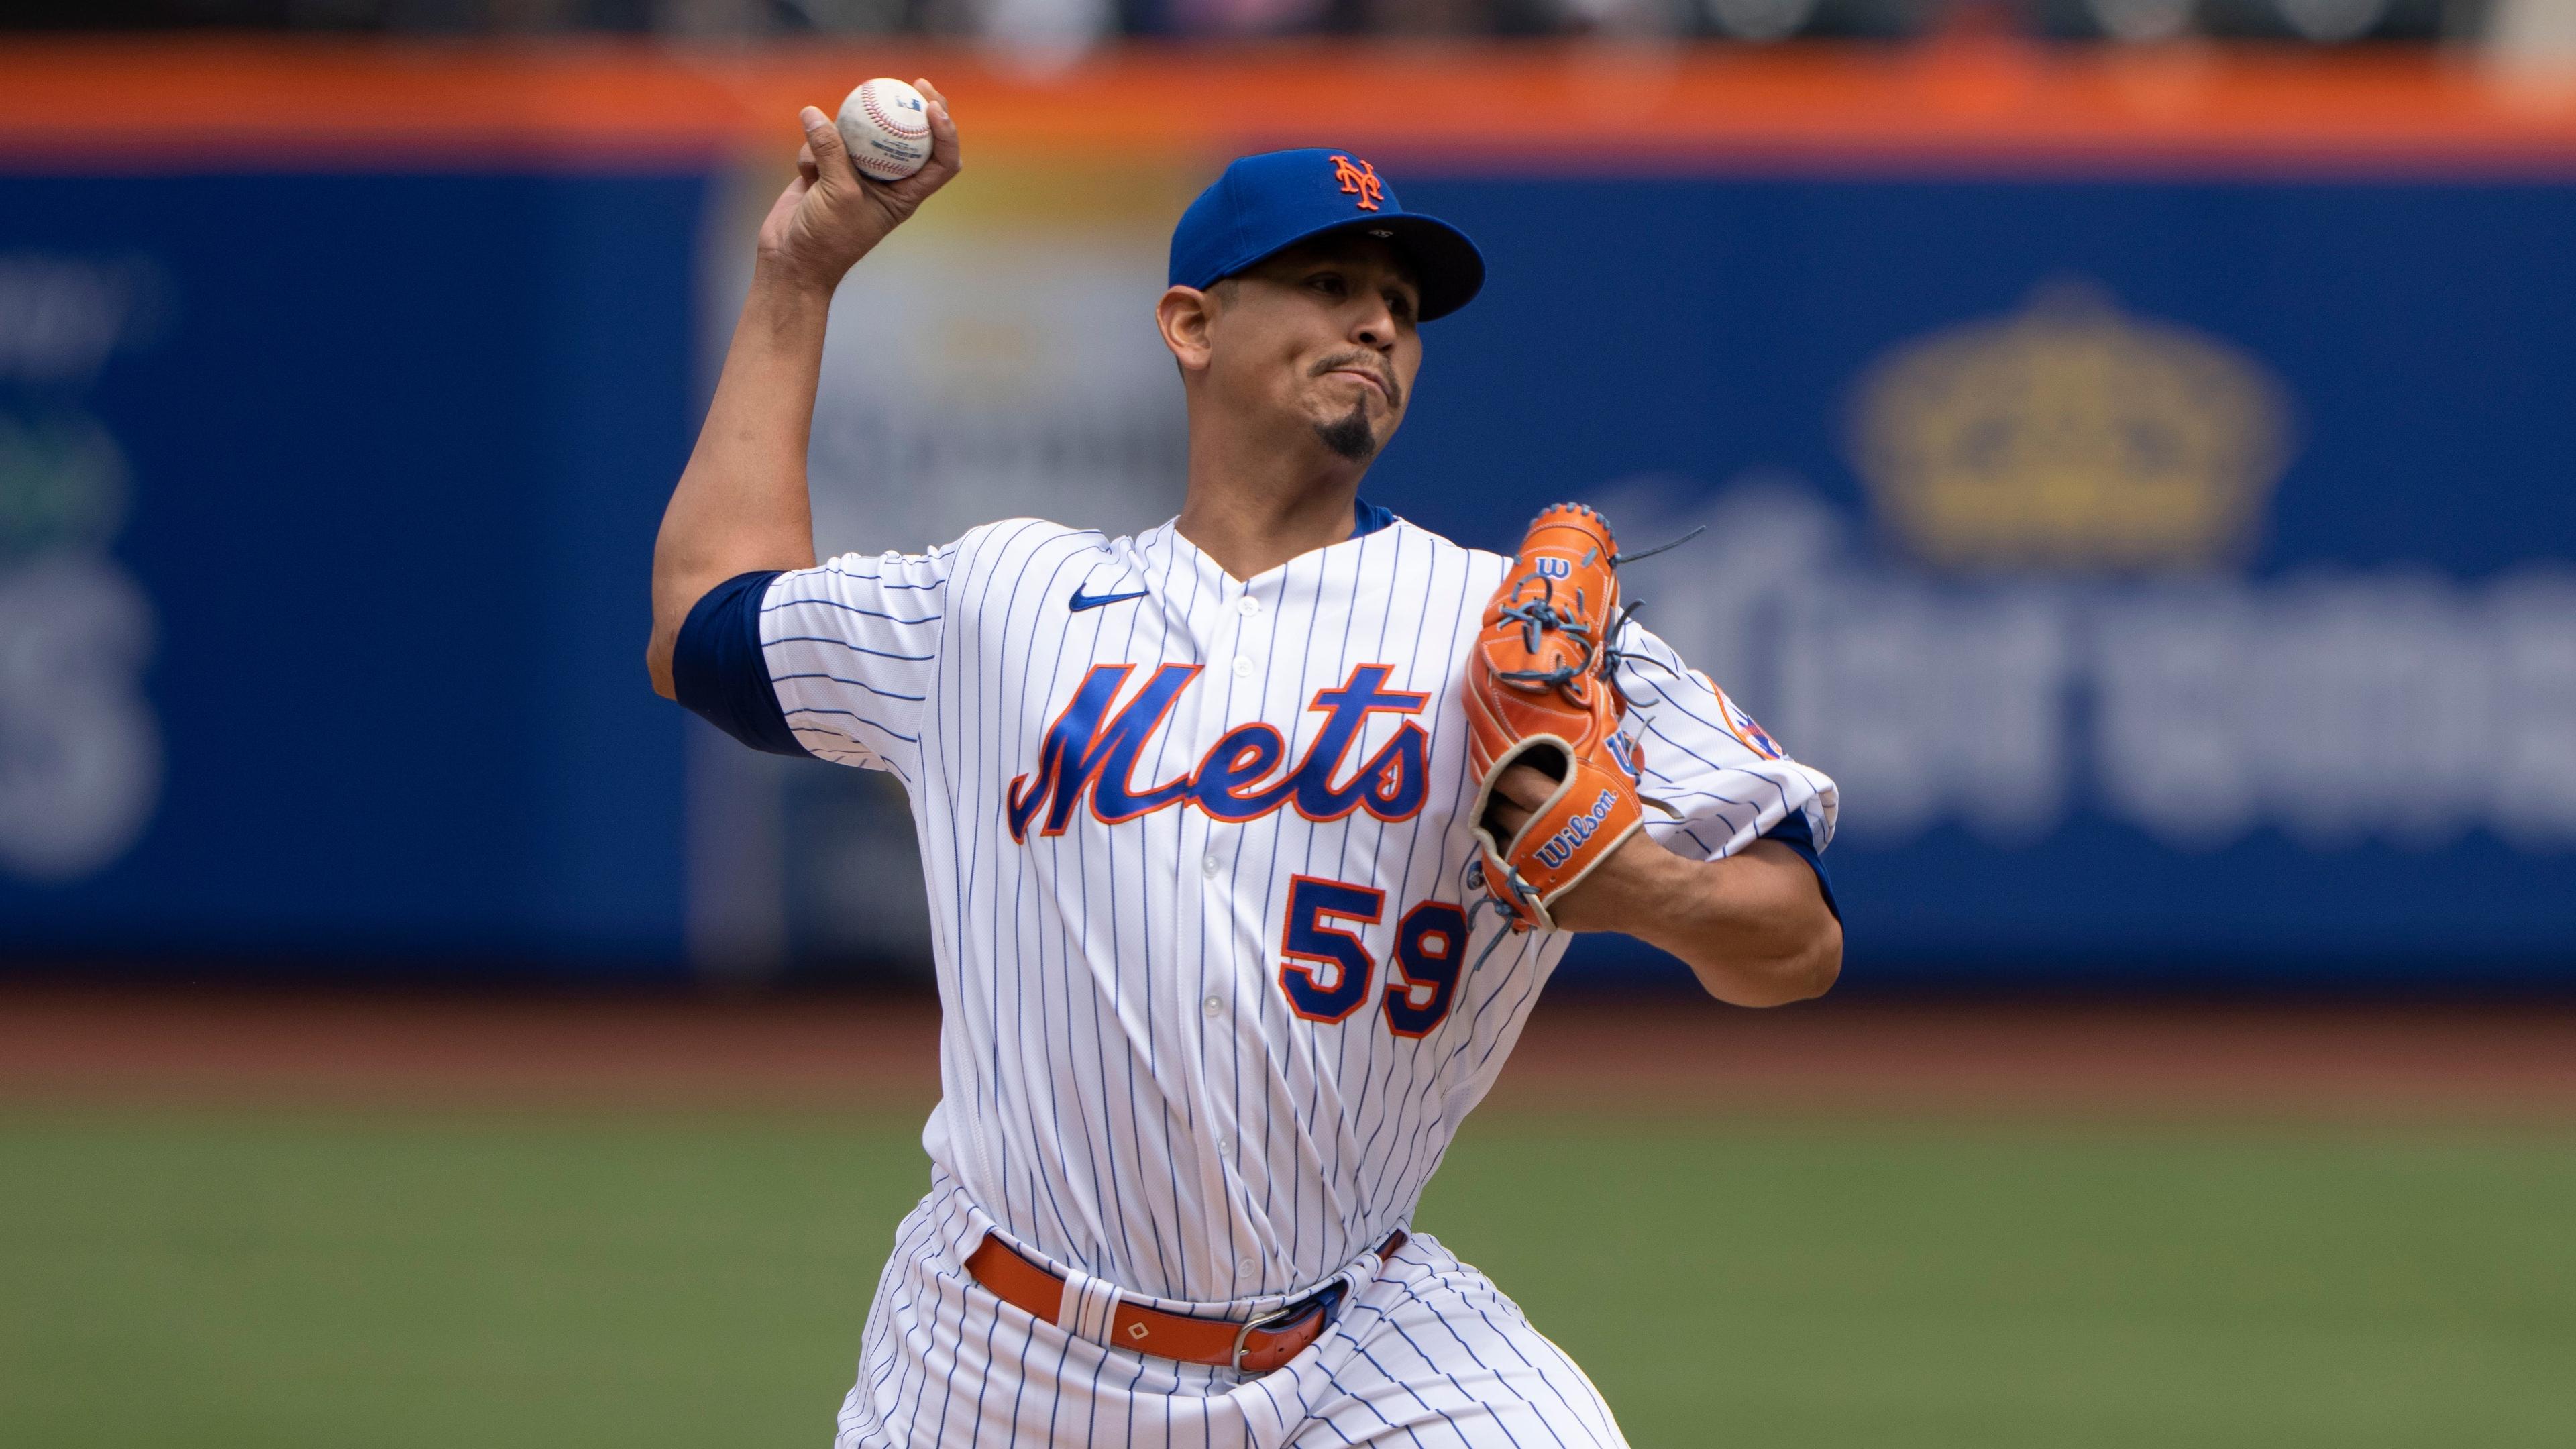 New York Mets pitcher Carlos Carrasco (59) delivers a pitch against the San Francisco Giants during the first inning at Citi Field. / Gregory Fisher-USA TODAY Sports